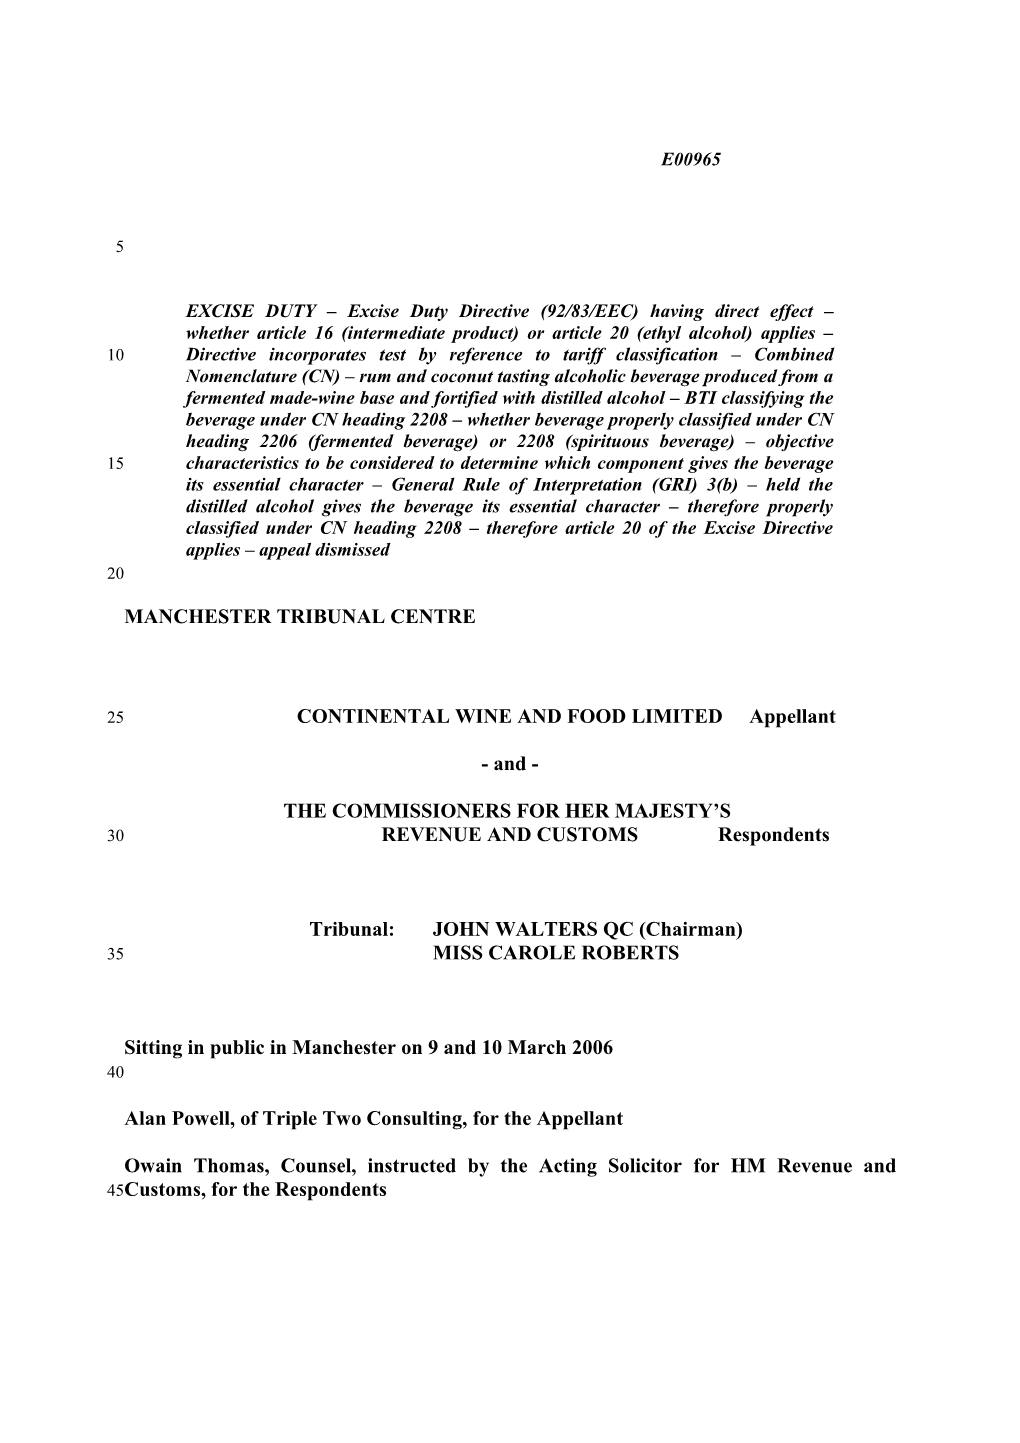 CONTINENTAL WINE and FOOD Limitedappellant